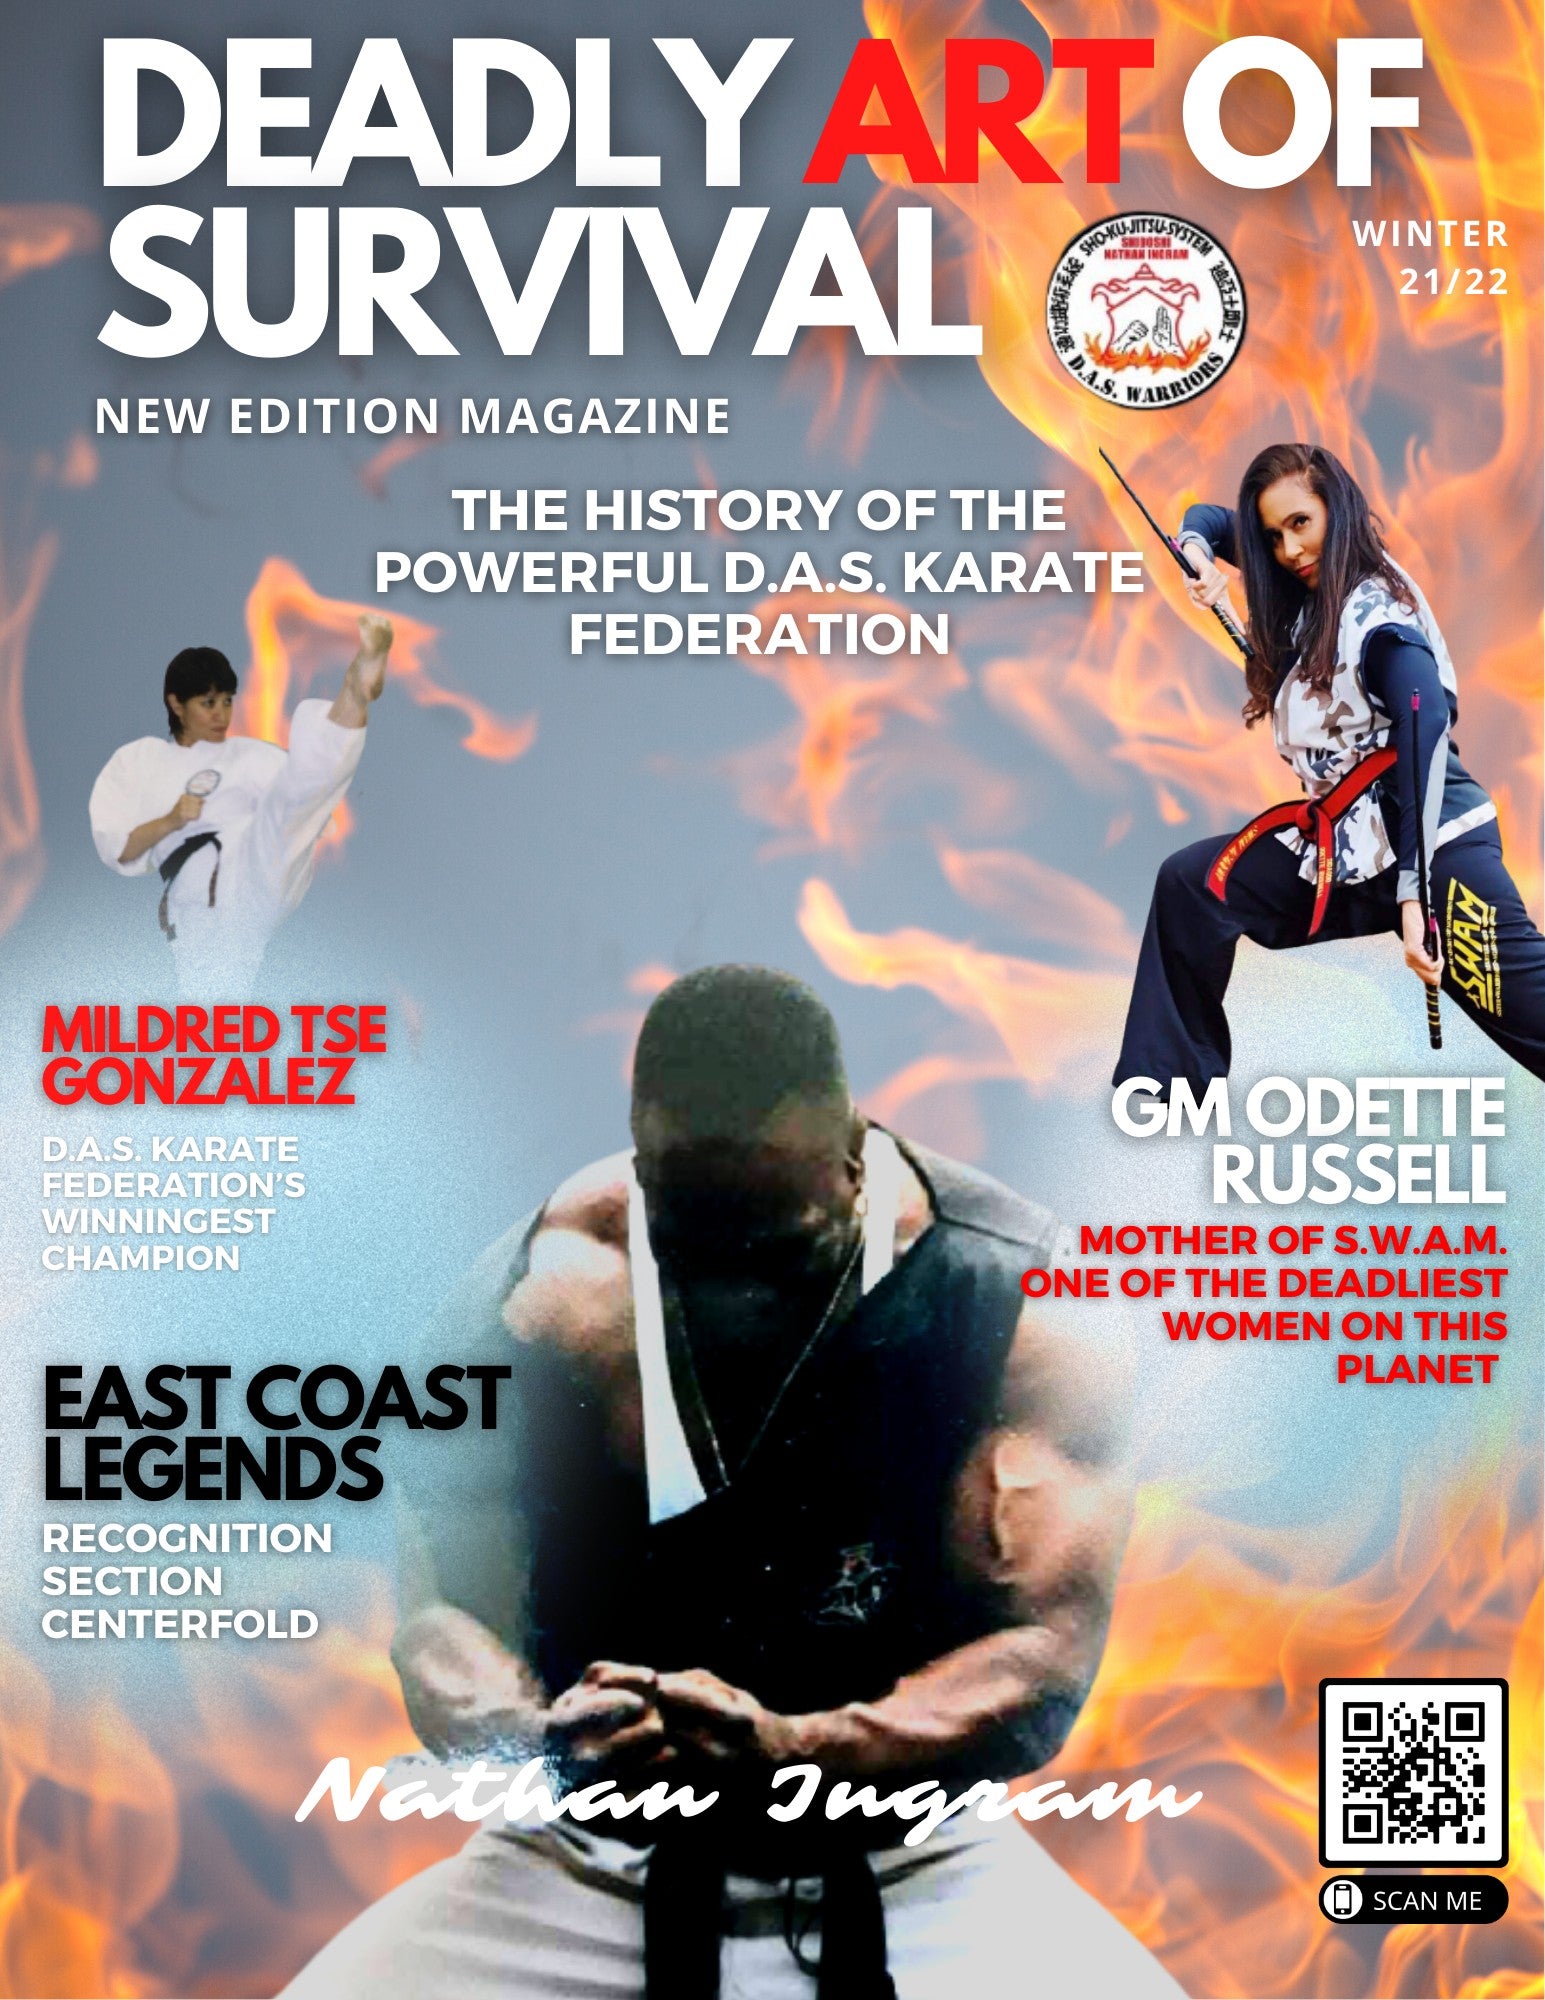 "#1 Bestseller on Amazon" The First Edition Deadly Art Of Survival Martial Arts Magazine (Available Now!) deadlyartofsurvival.com